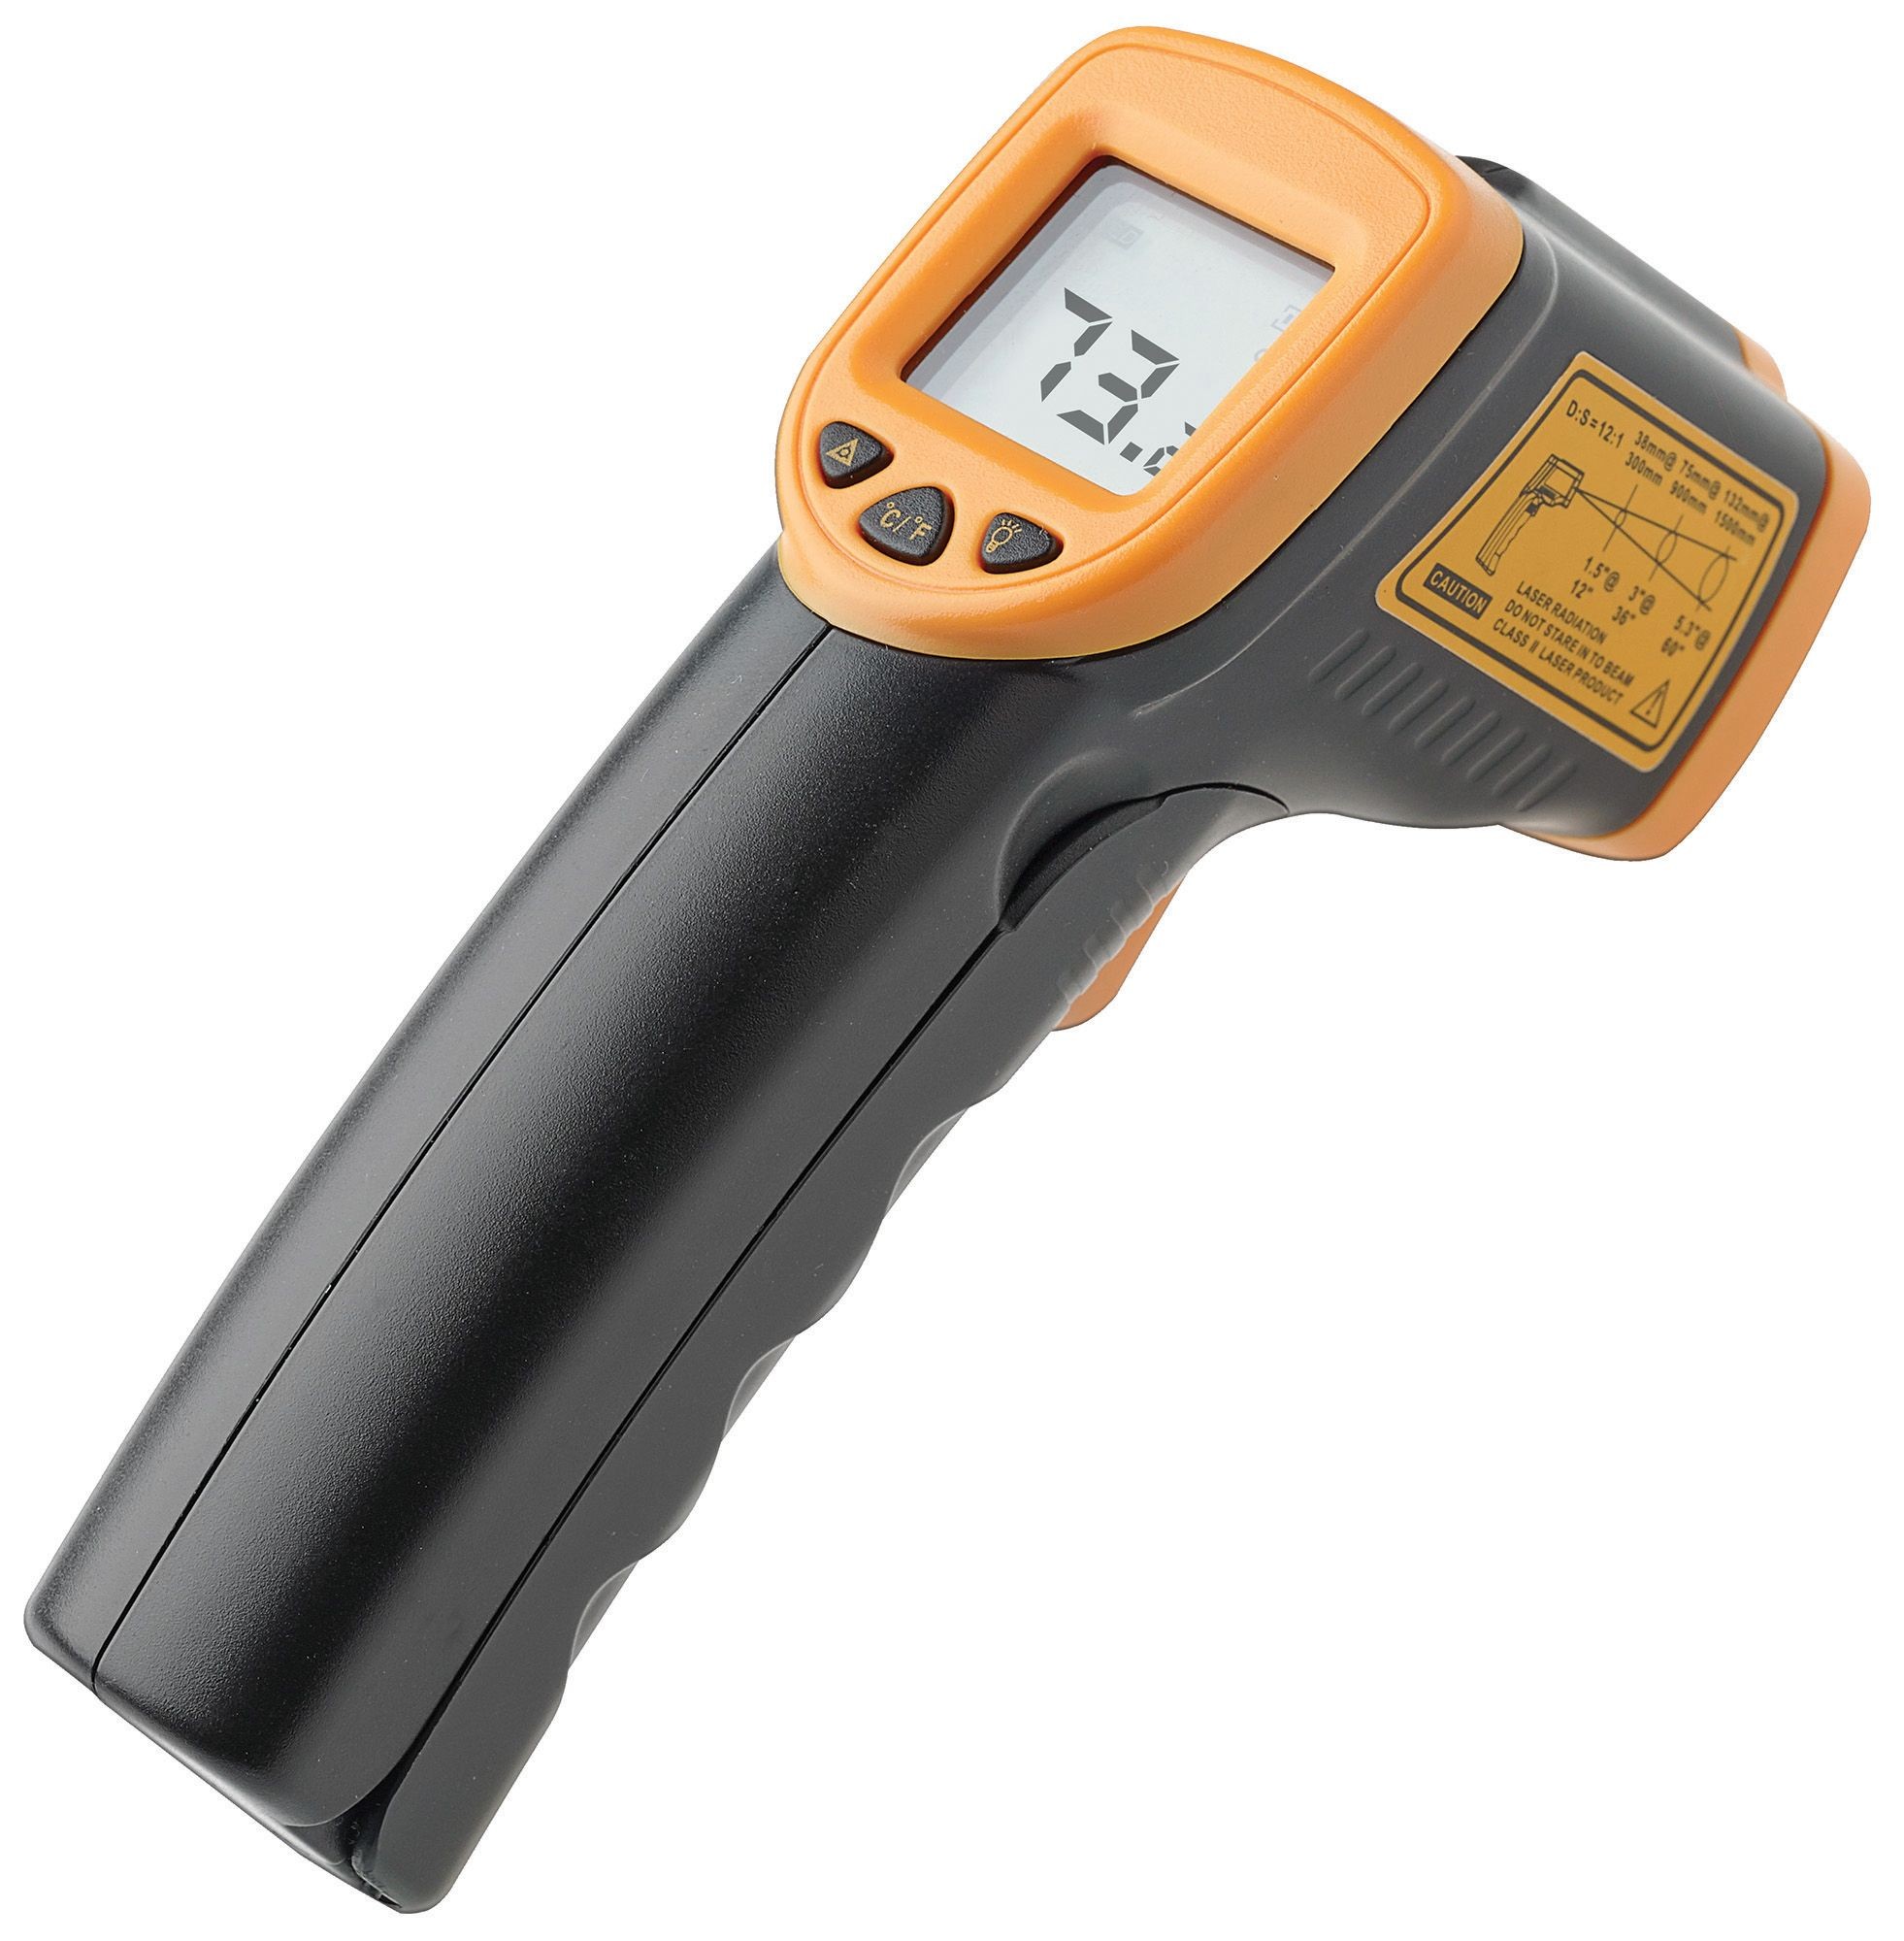 https://www.lionsdeal.com/itempics/Infrared-Thermometer-32119_xlarge.jpg